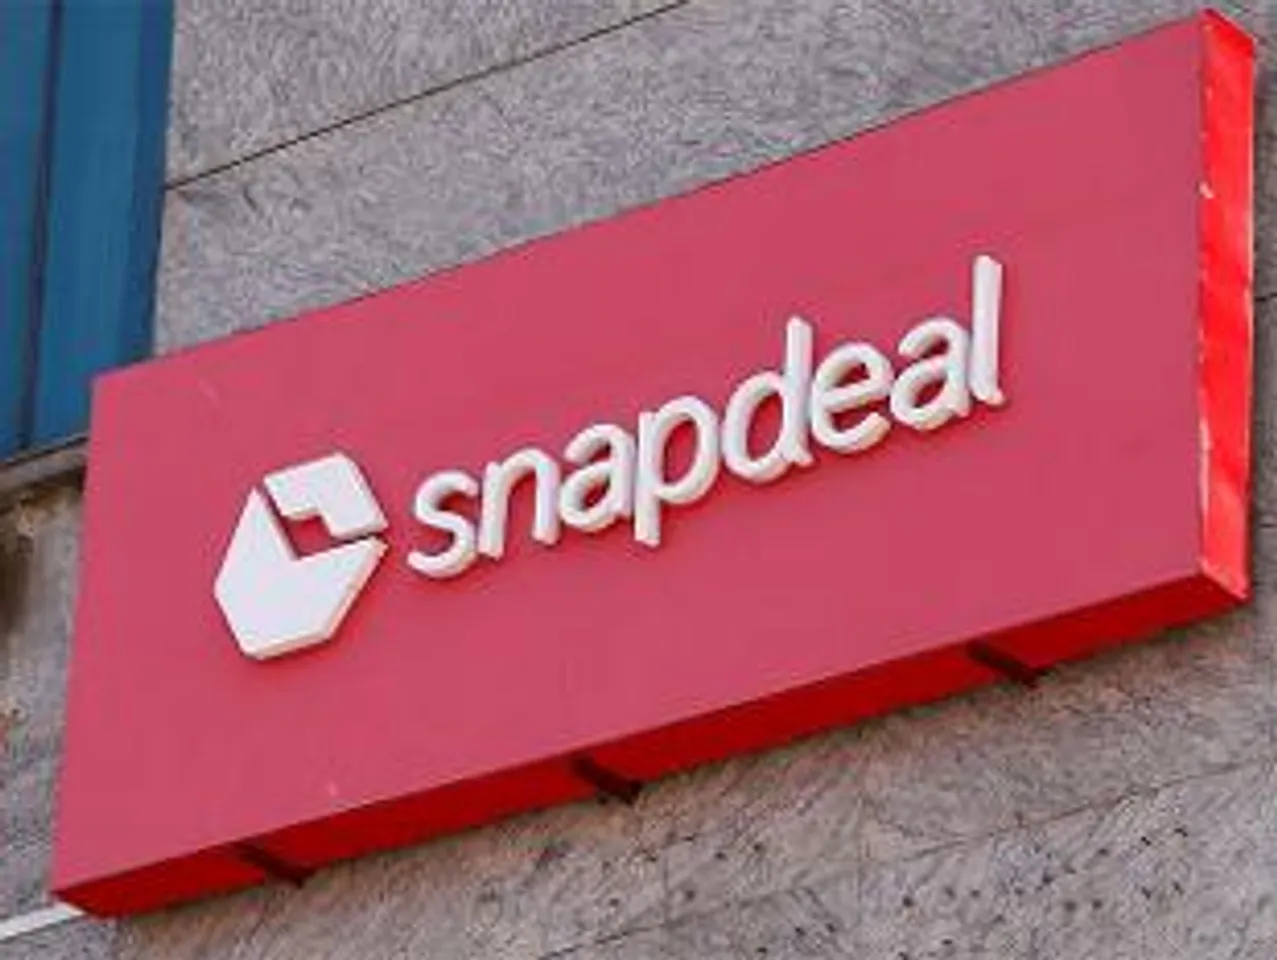 Snapdeal AI Hackathon Announced, Winner to Receive Rs 50,000 and Job Offer